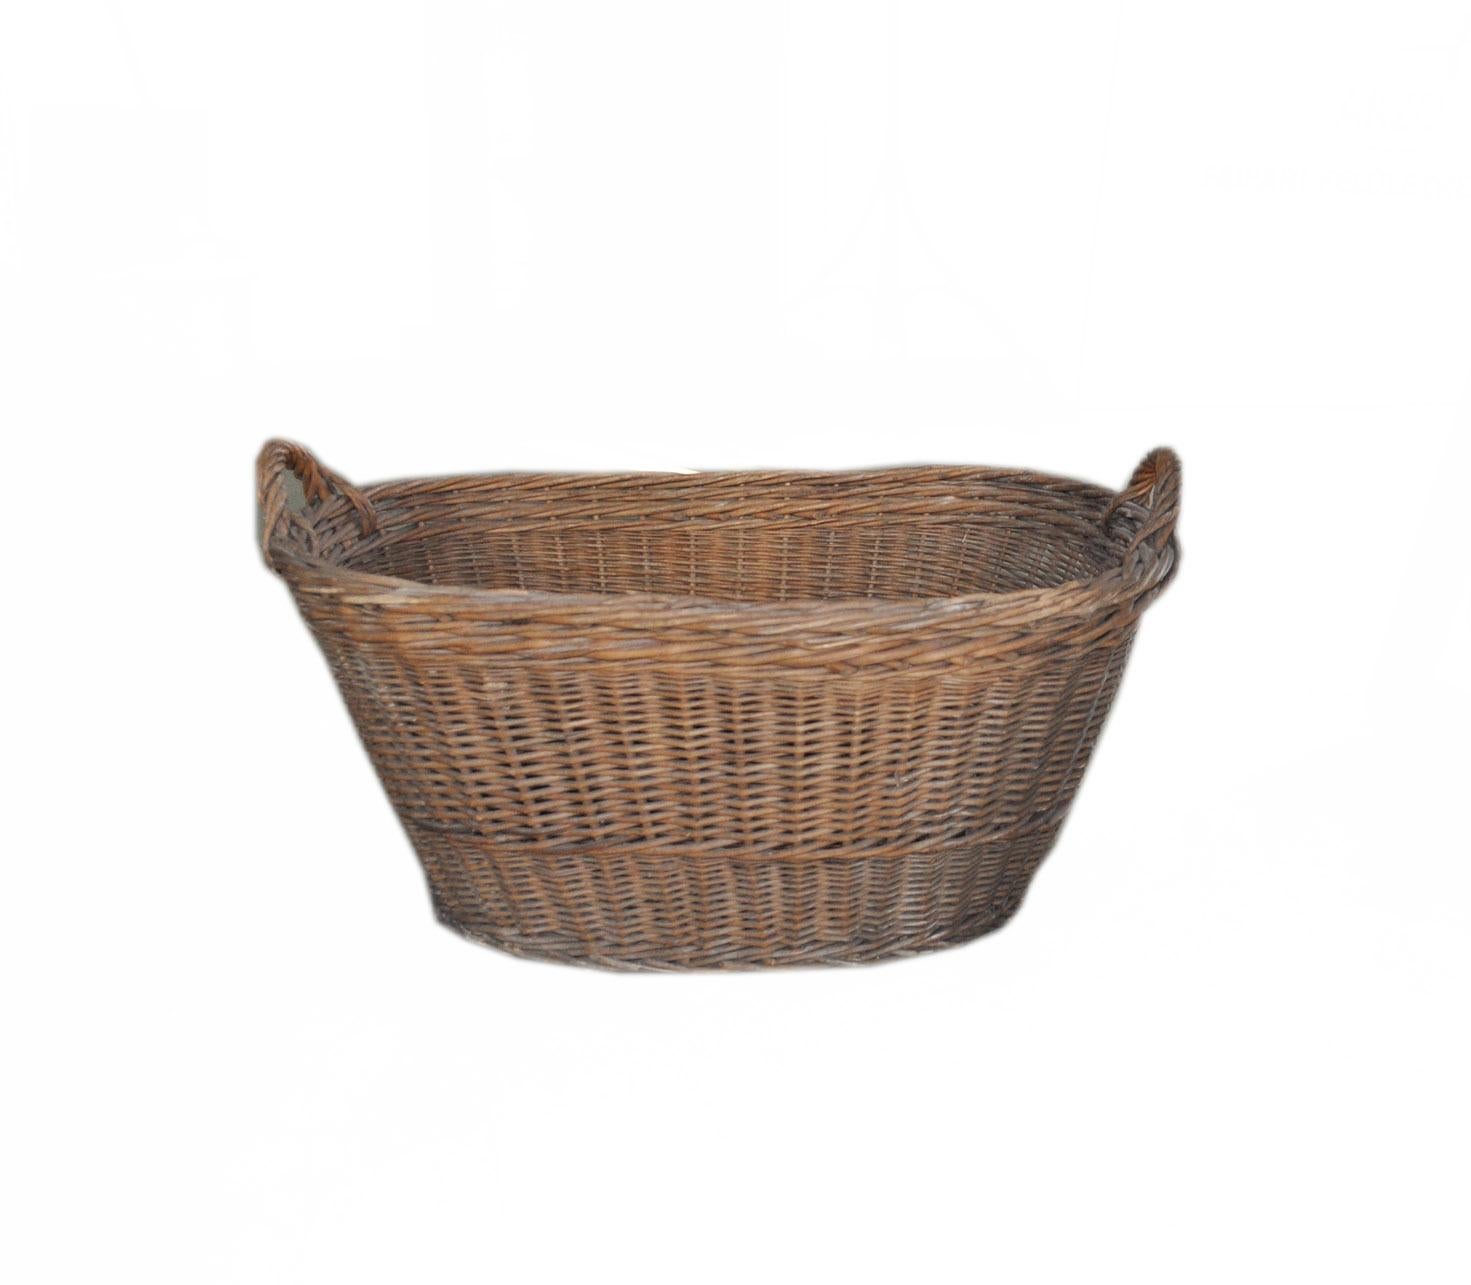 Rustic wood basket, circa 1940s
This item is a vintage laundry basket.
You can use it for decorating your country chic home. 
Handmade and handwoven of a thick wicker in superb condition and a lovely warm patina.
Great as a decorative item by